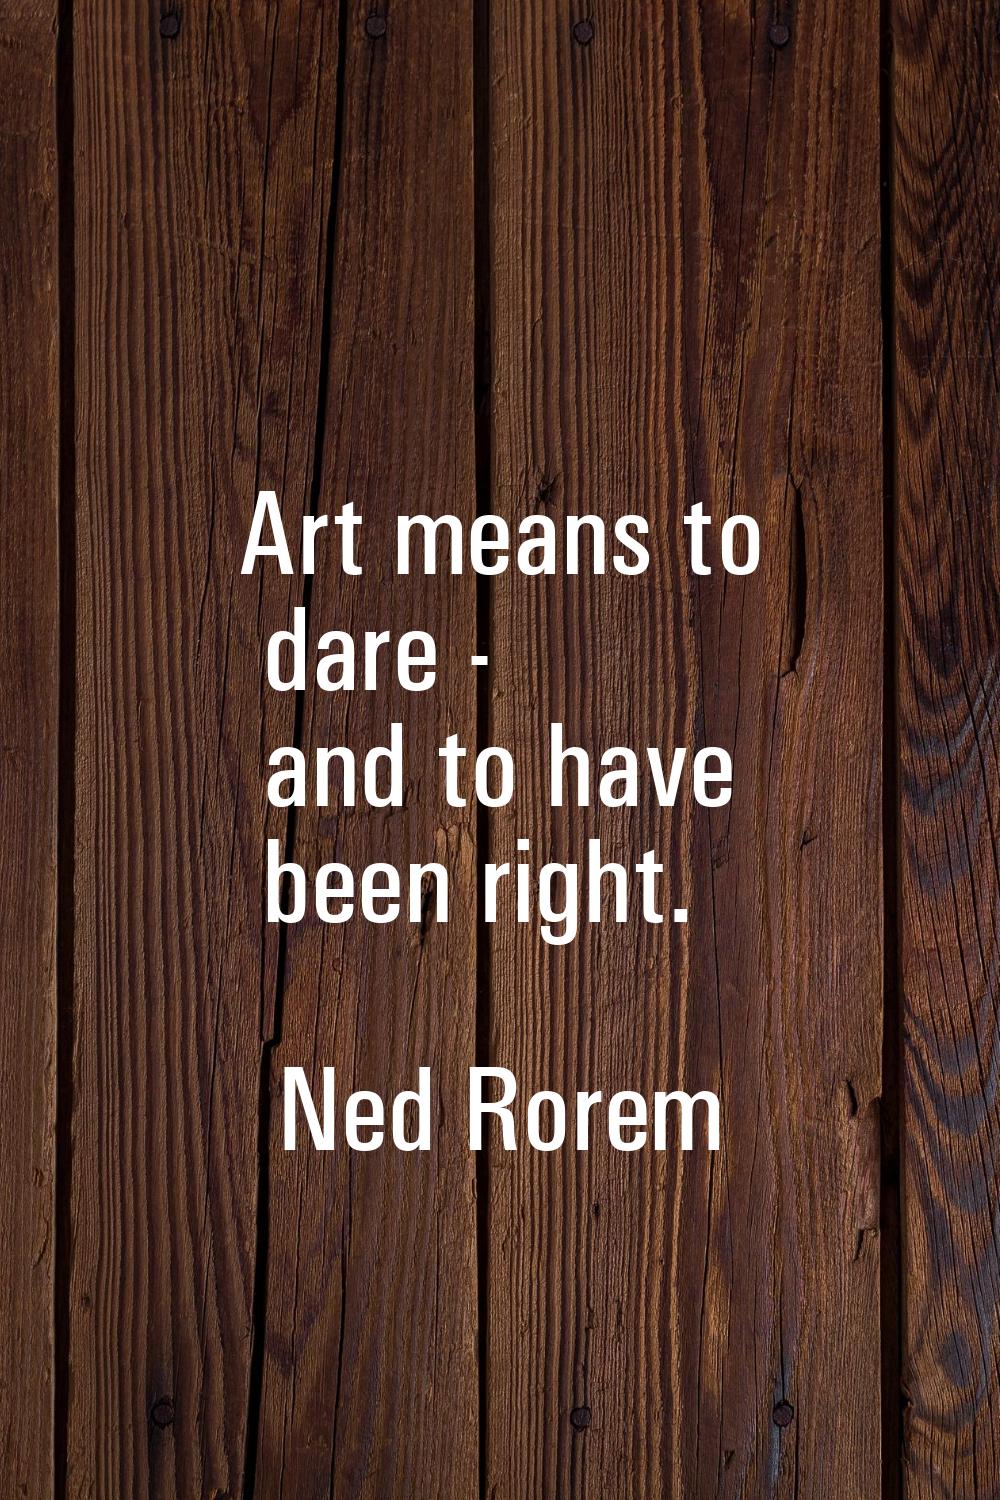 Art means to dare - and to have been right.